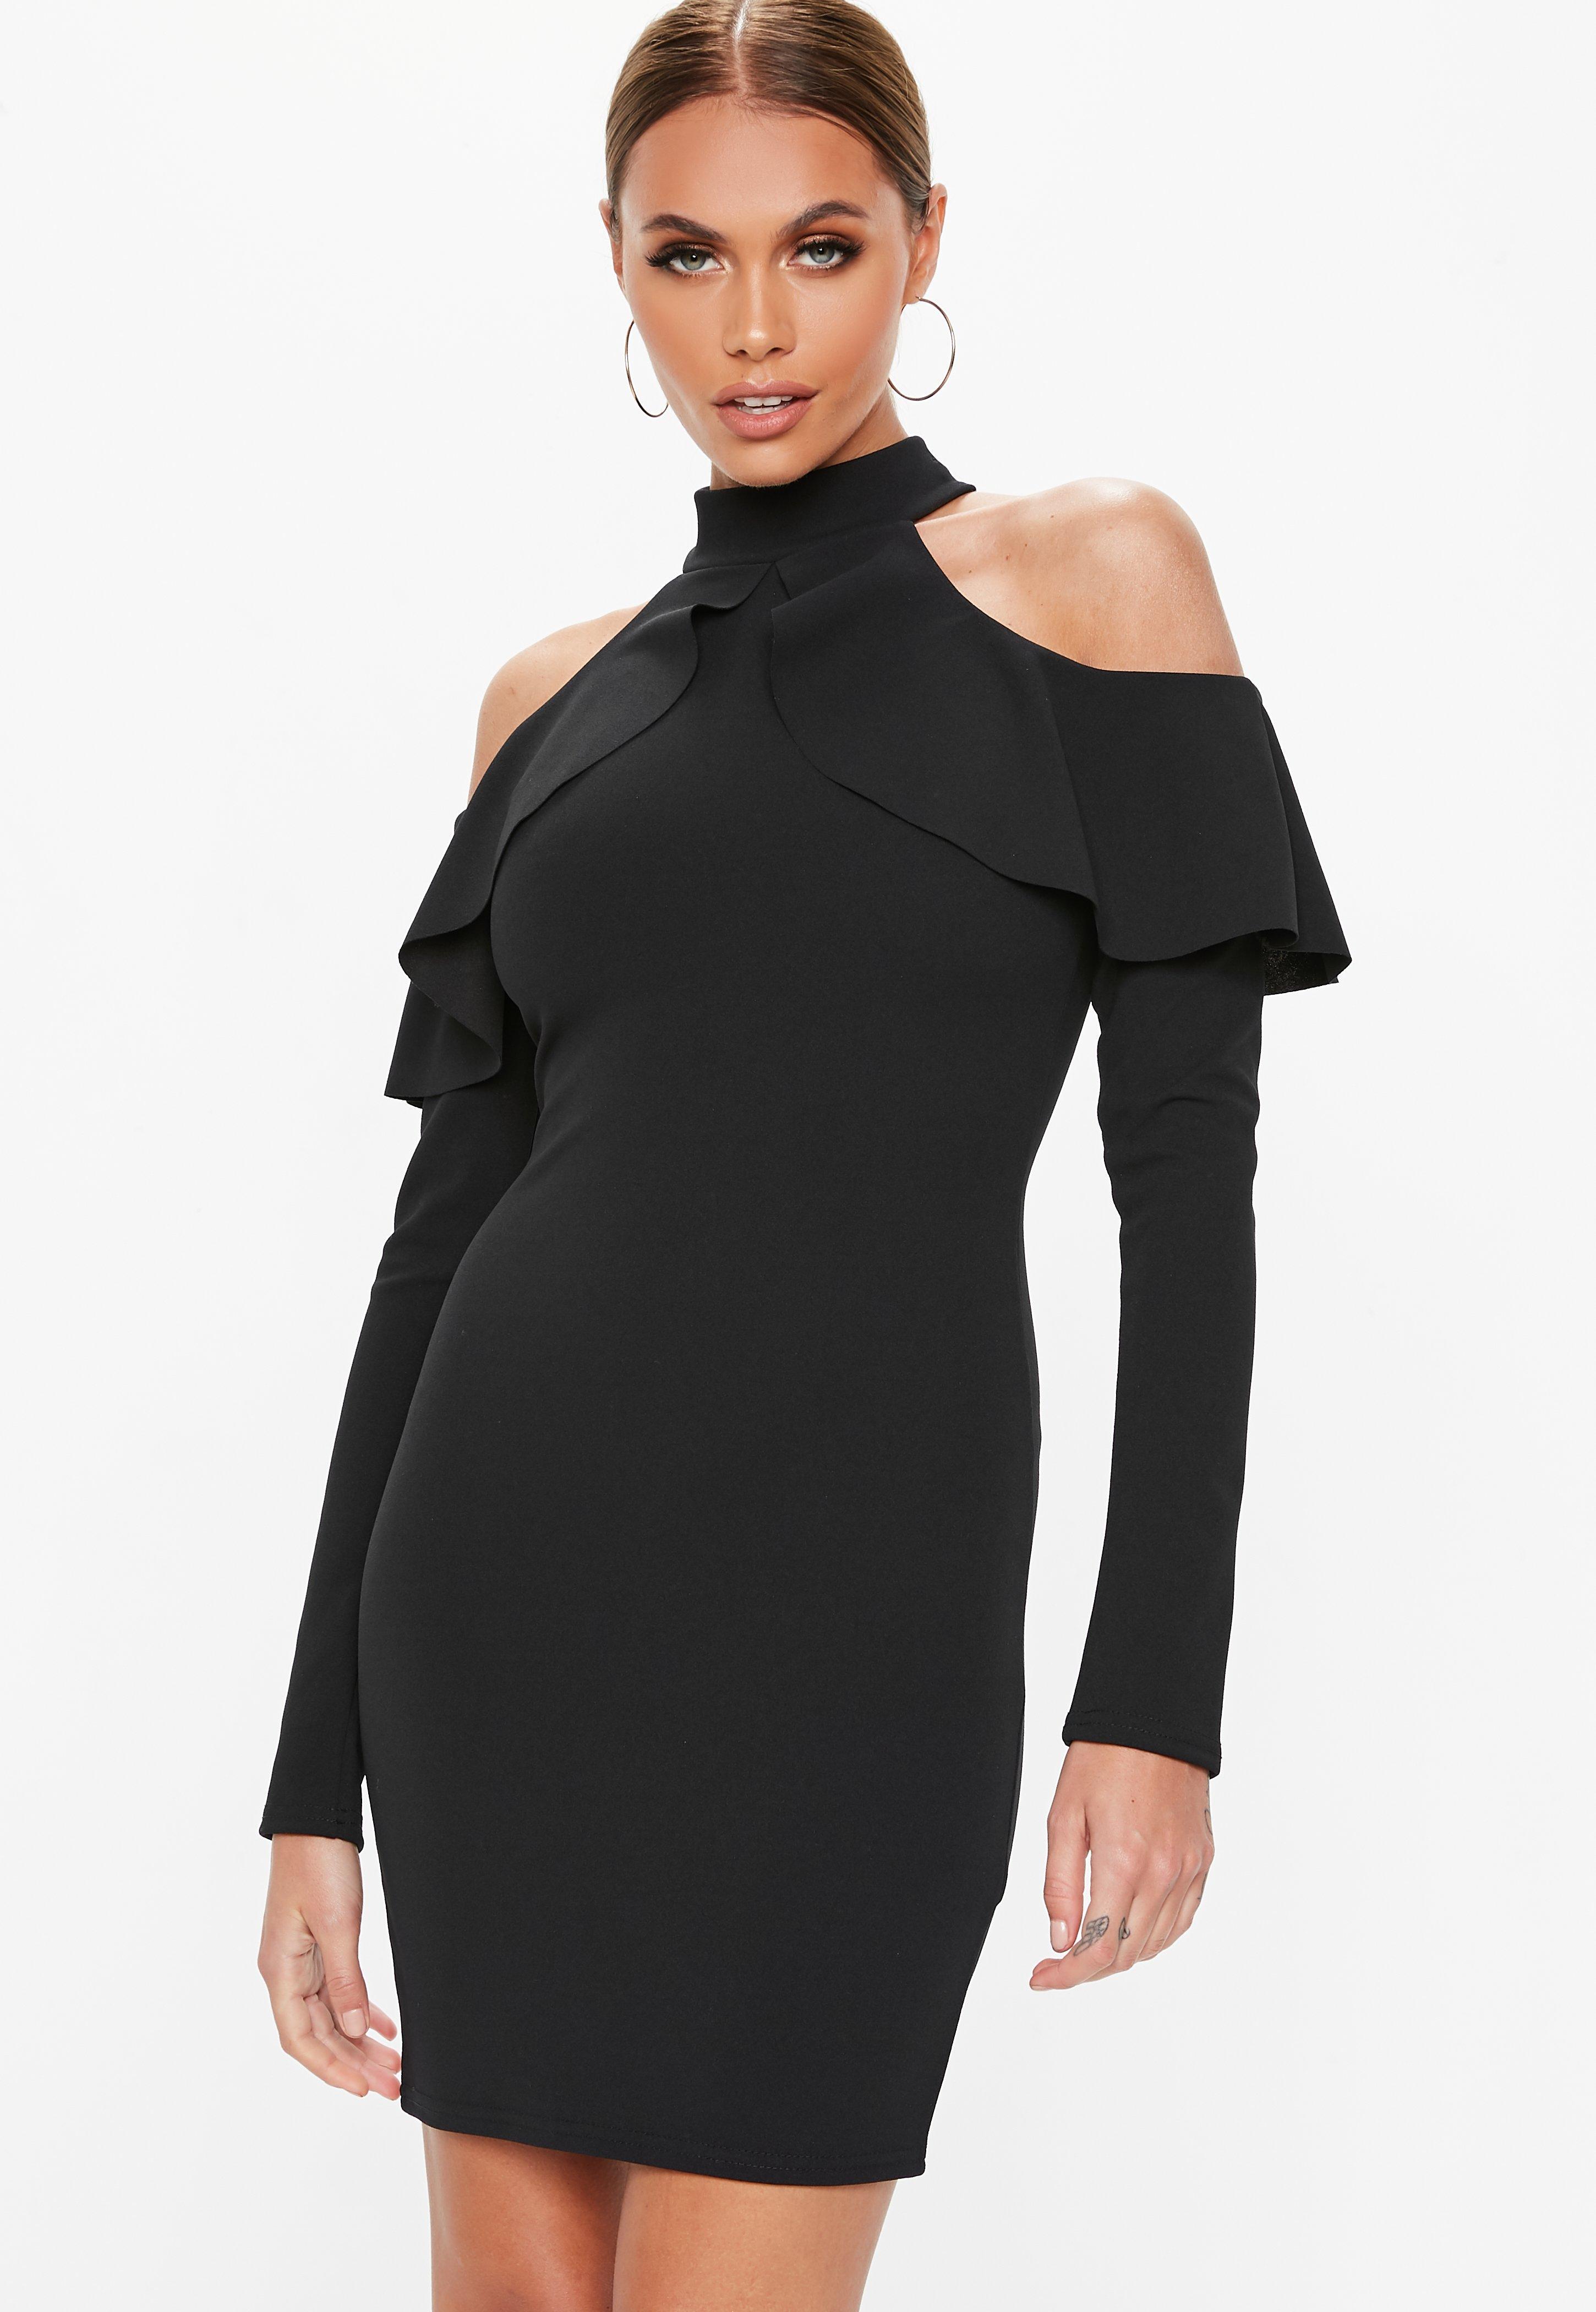 Lyst - Missguided Black Frill Cold Shoulder Long Sleeve Mini Dress in Black